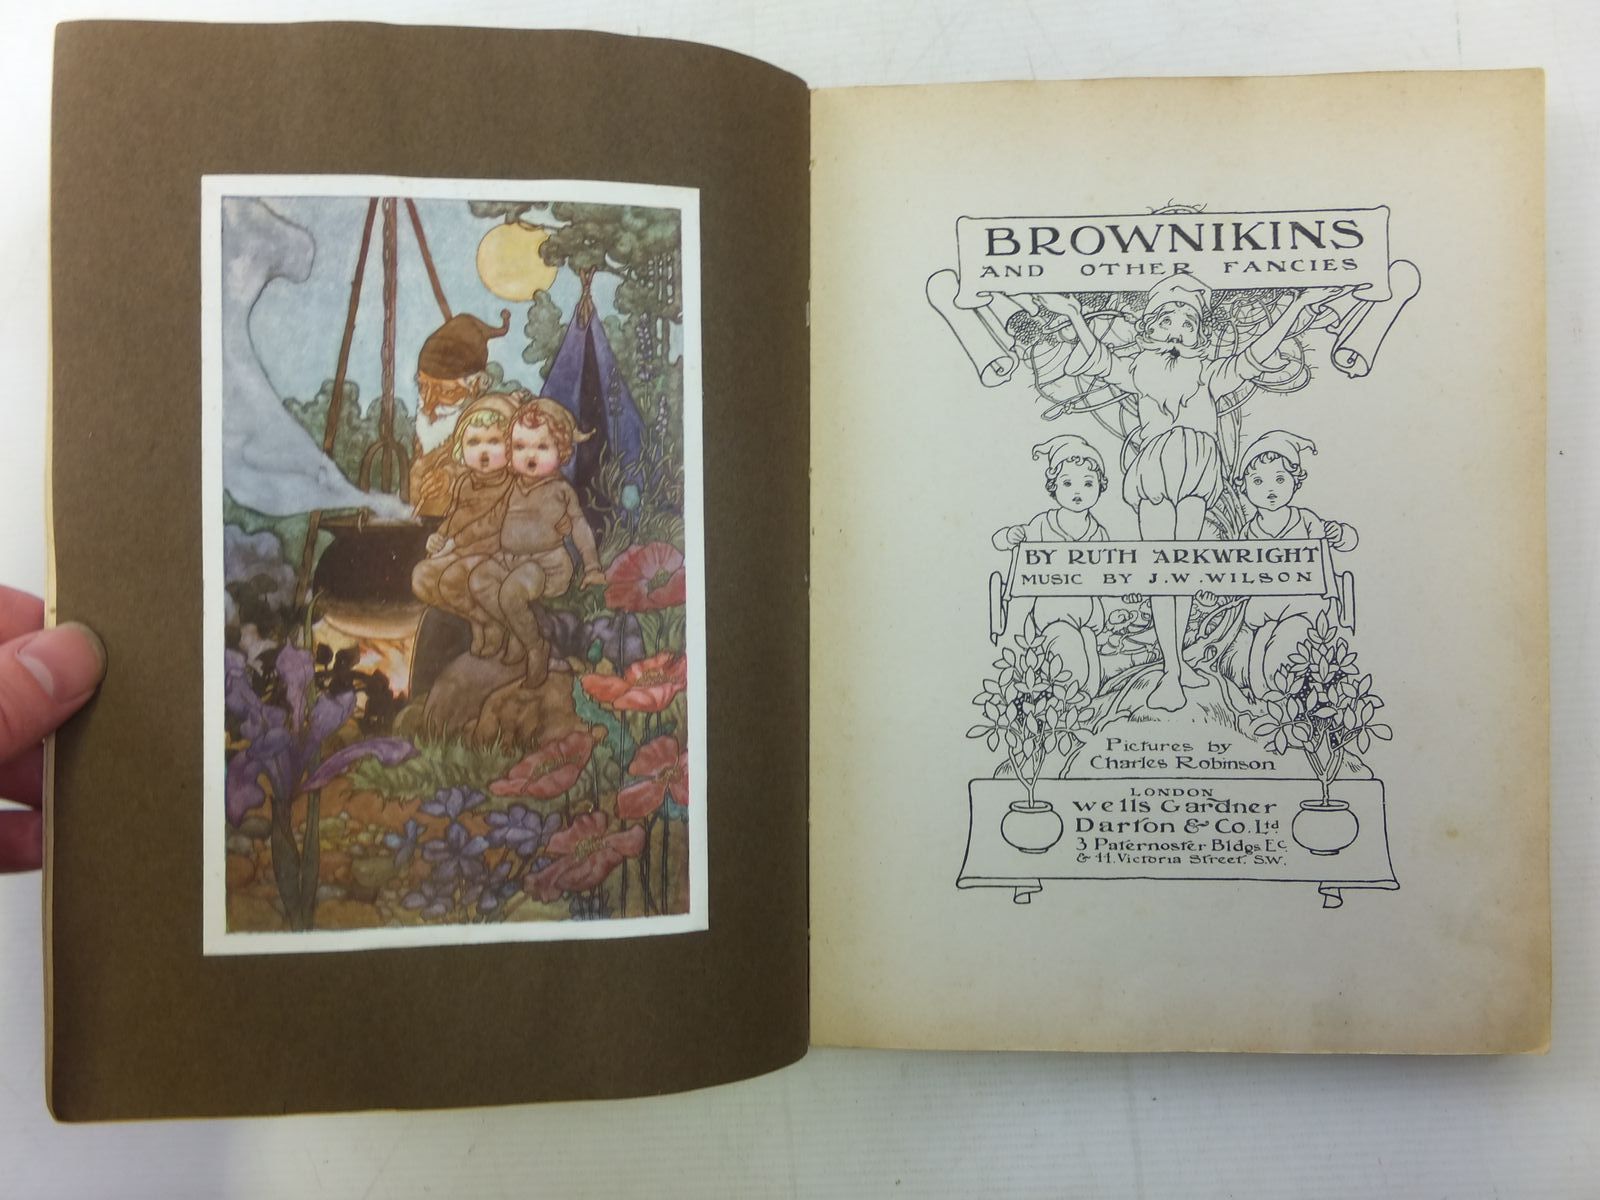 Photo of BROWNIKINS AND OTHER FANCIES written by Arkwright, Ruth illustrated by Robinson, Charles published by Wells Gardner, Darton & Co. Ltd. (STOCK CODE: 2119802)  for sale by Stella & Rose's Books